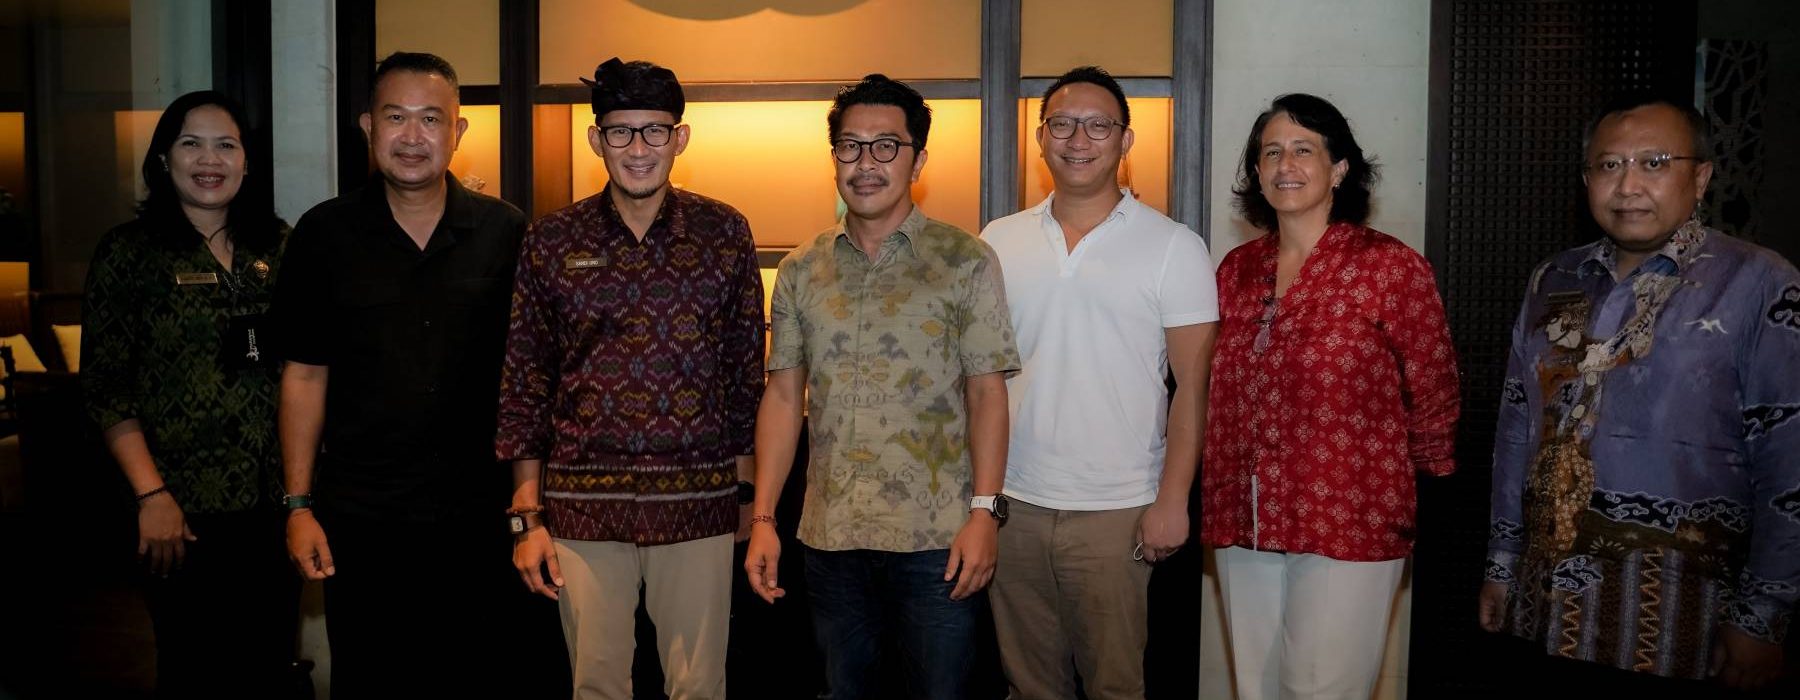 Raffles Bali - Rumari at Raffles Bali successfully launched Epicurean Journey collaboration series, proudly highlighted the richness of the archipelago